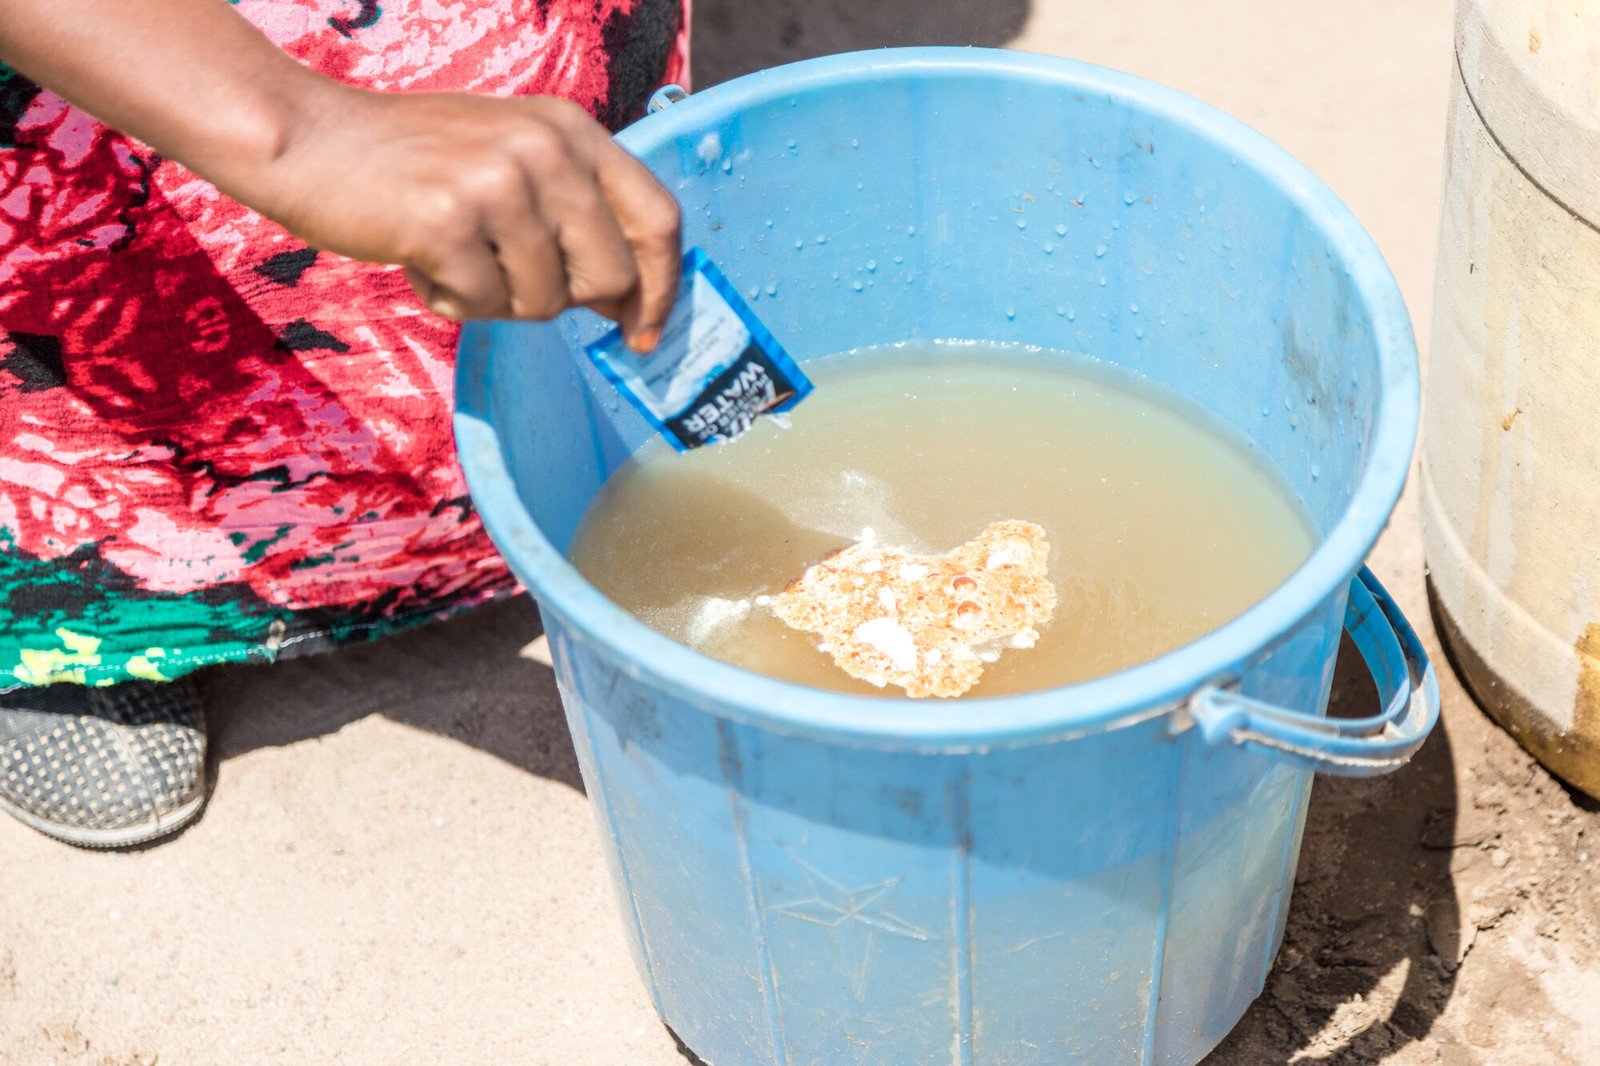 Water purifying powder being poured into a bucket of dirty water.